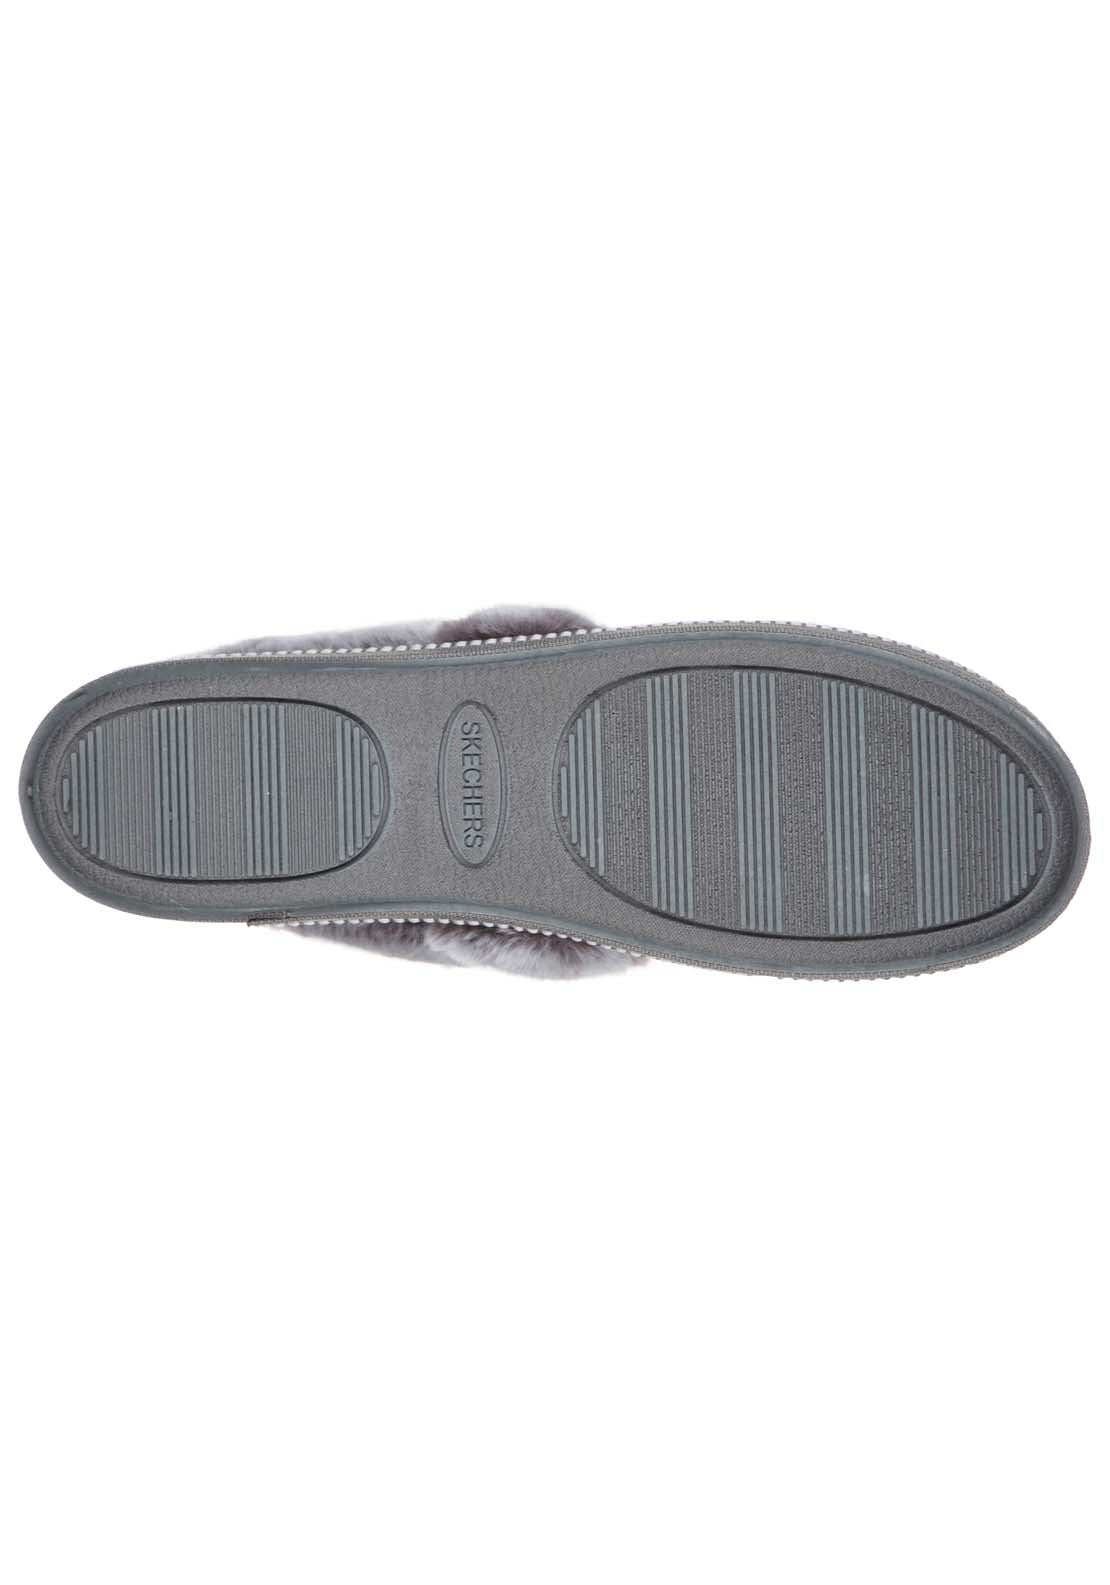 Skechers Cosy Campfire Slipper - Grey 3 Shaws Department Stores